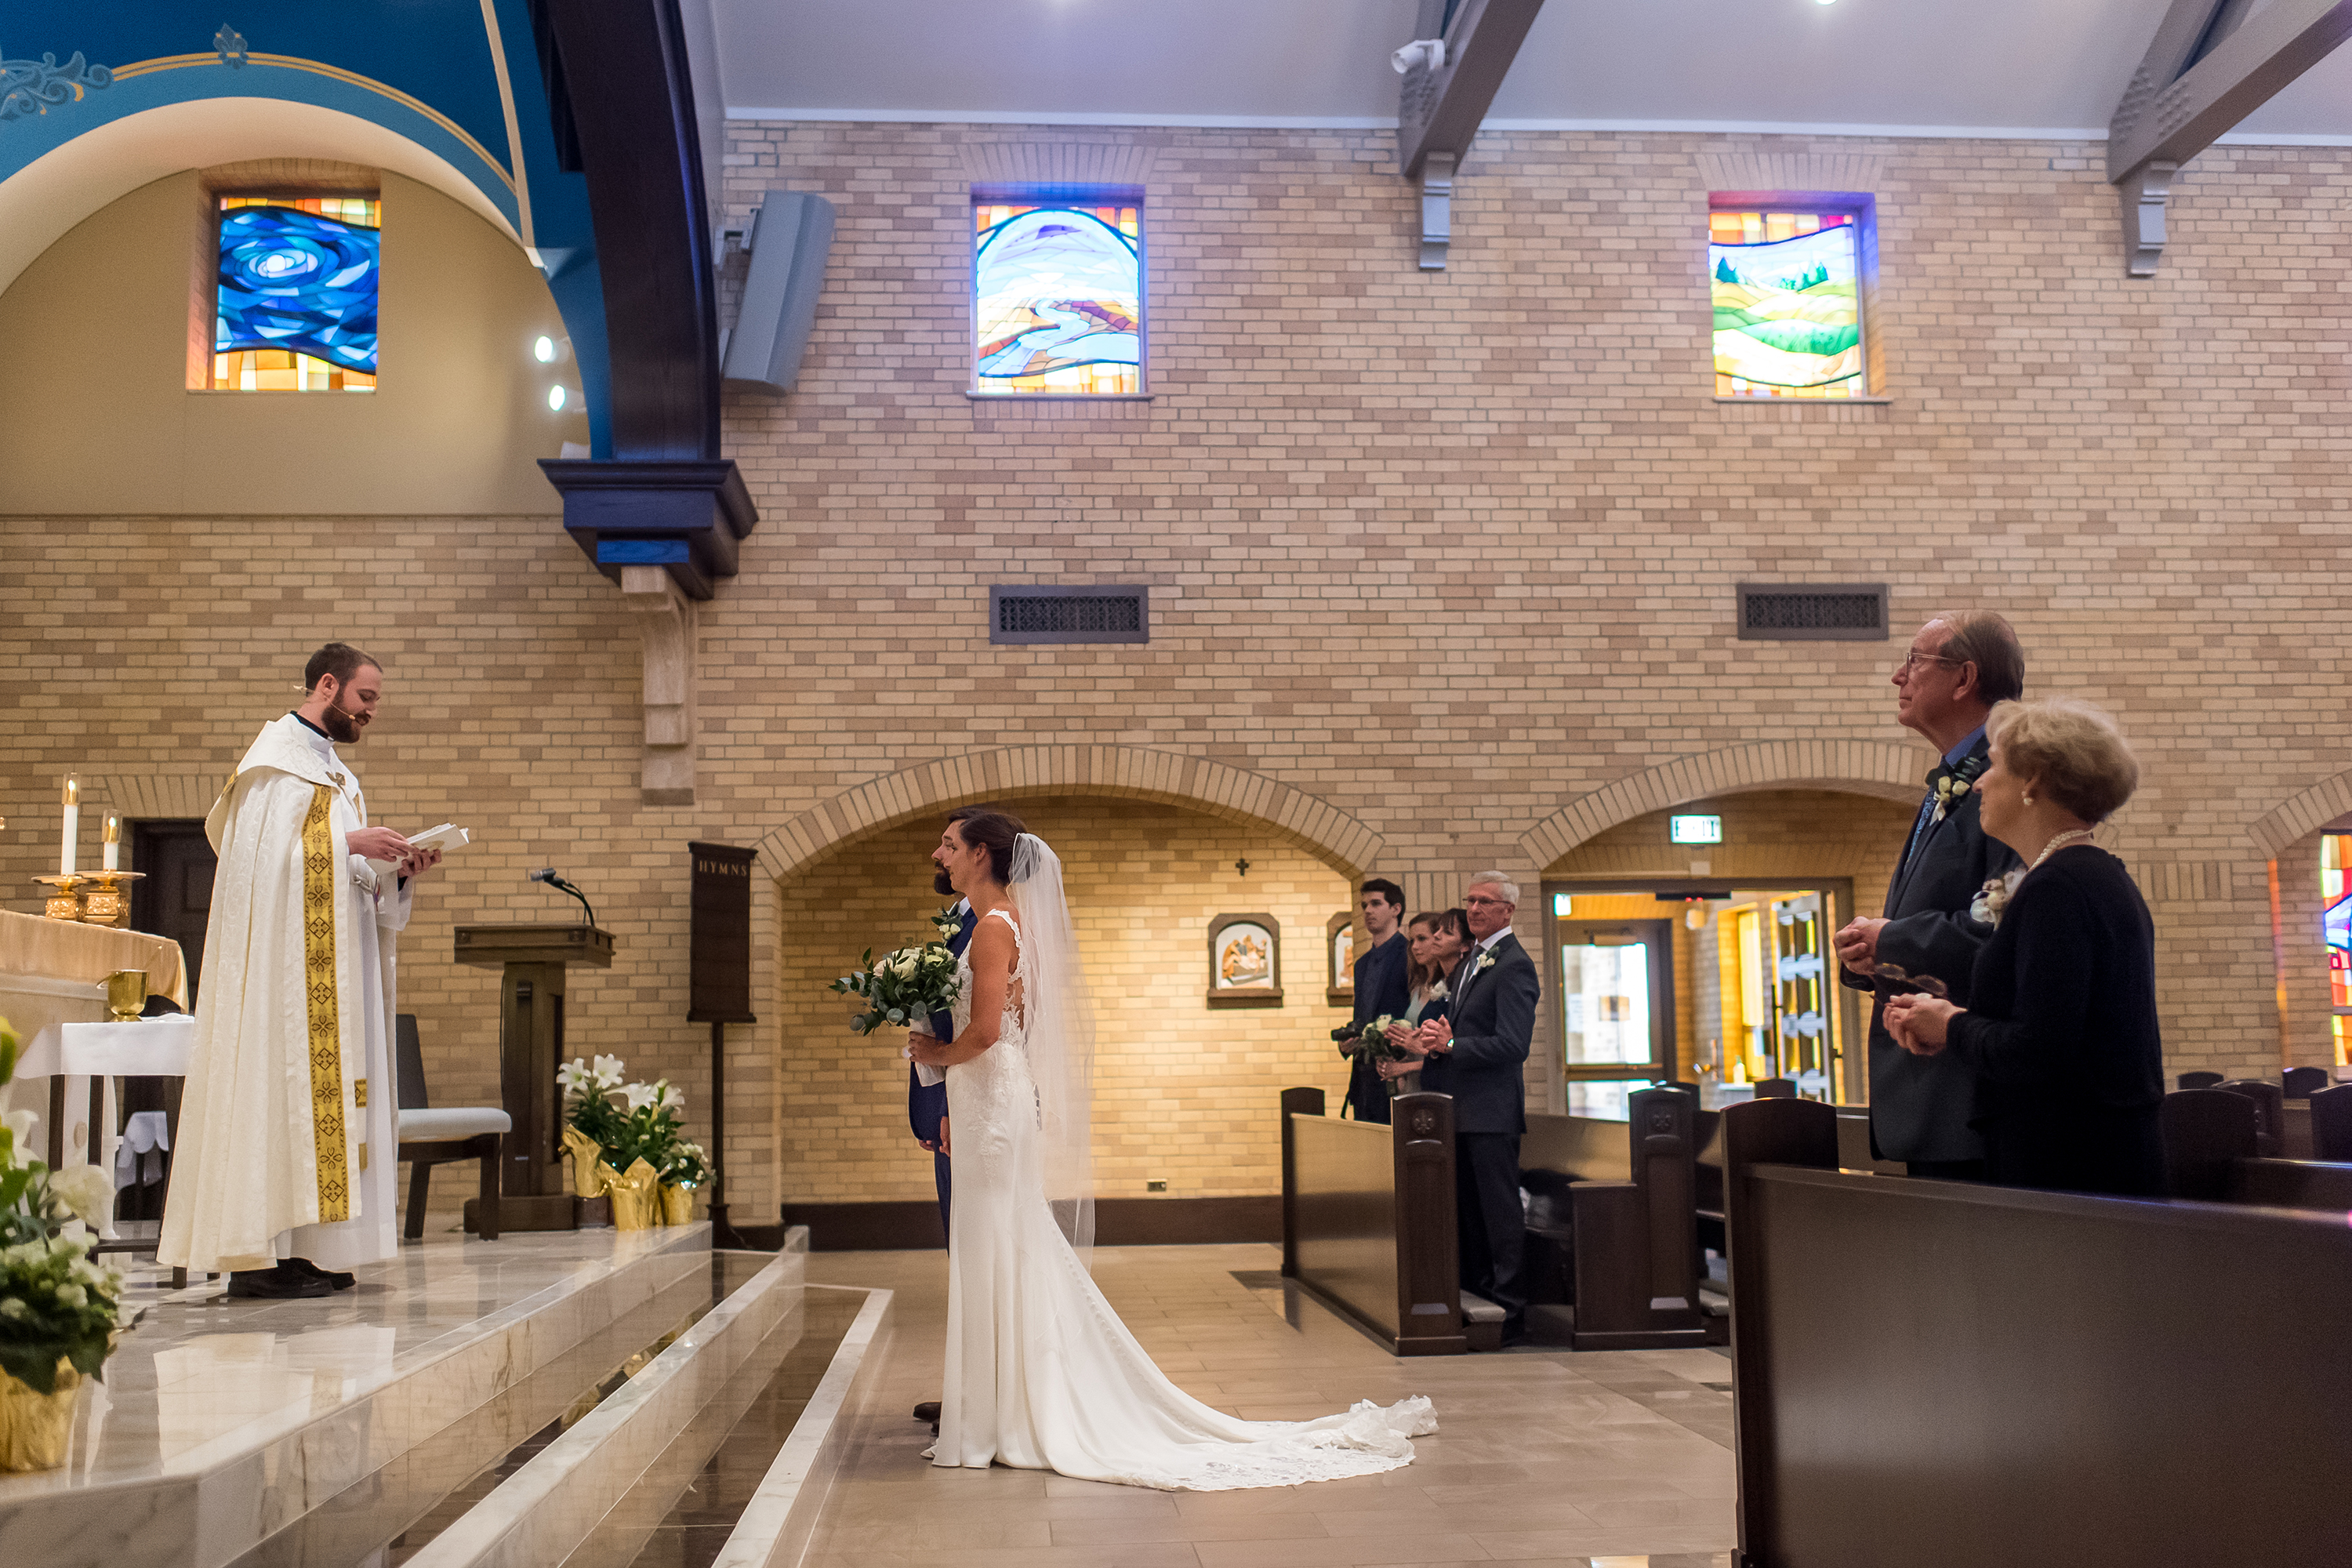 Standing at the alter for a wedding Mass at Our Lady of Lourdes Catholic Church in Denver, Colorado.